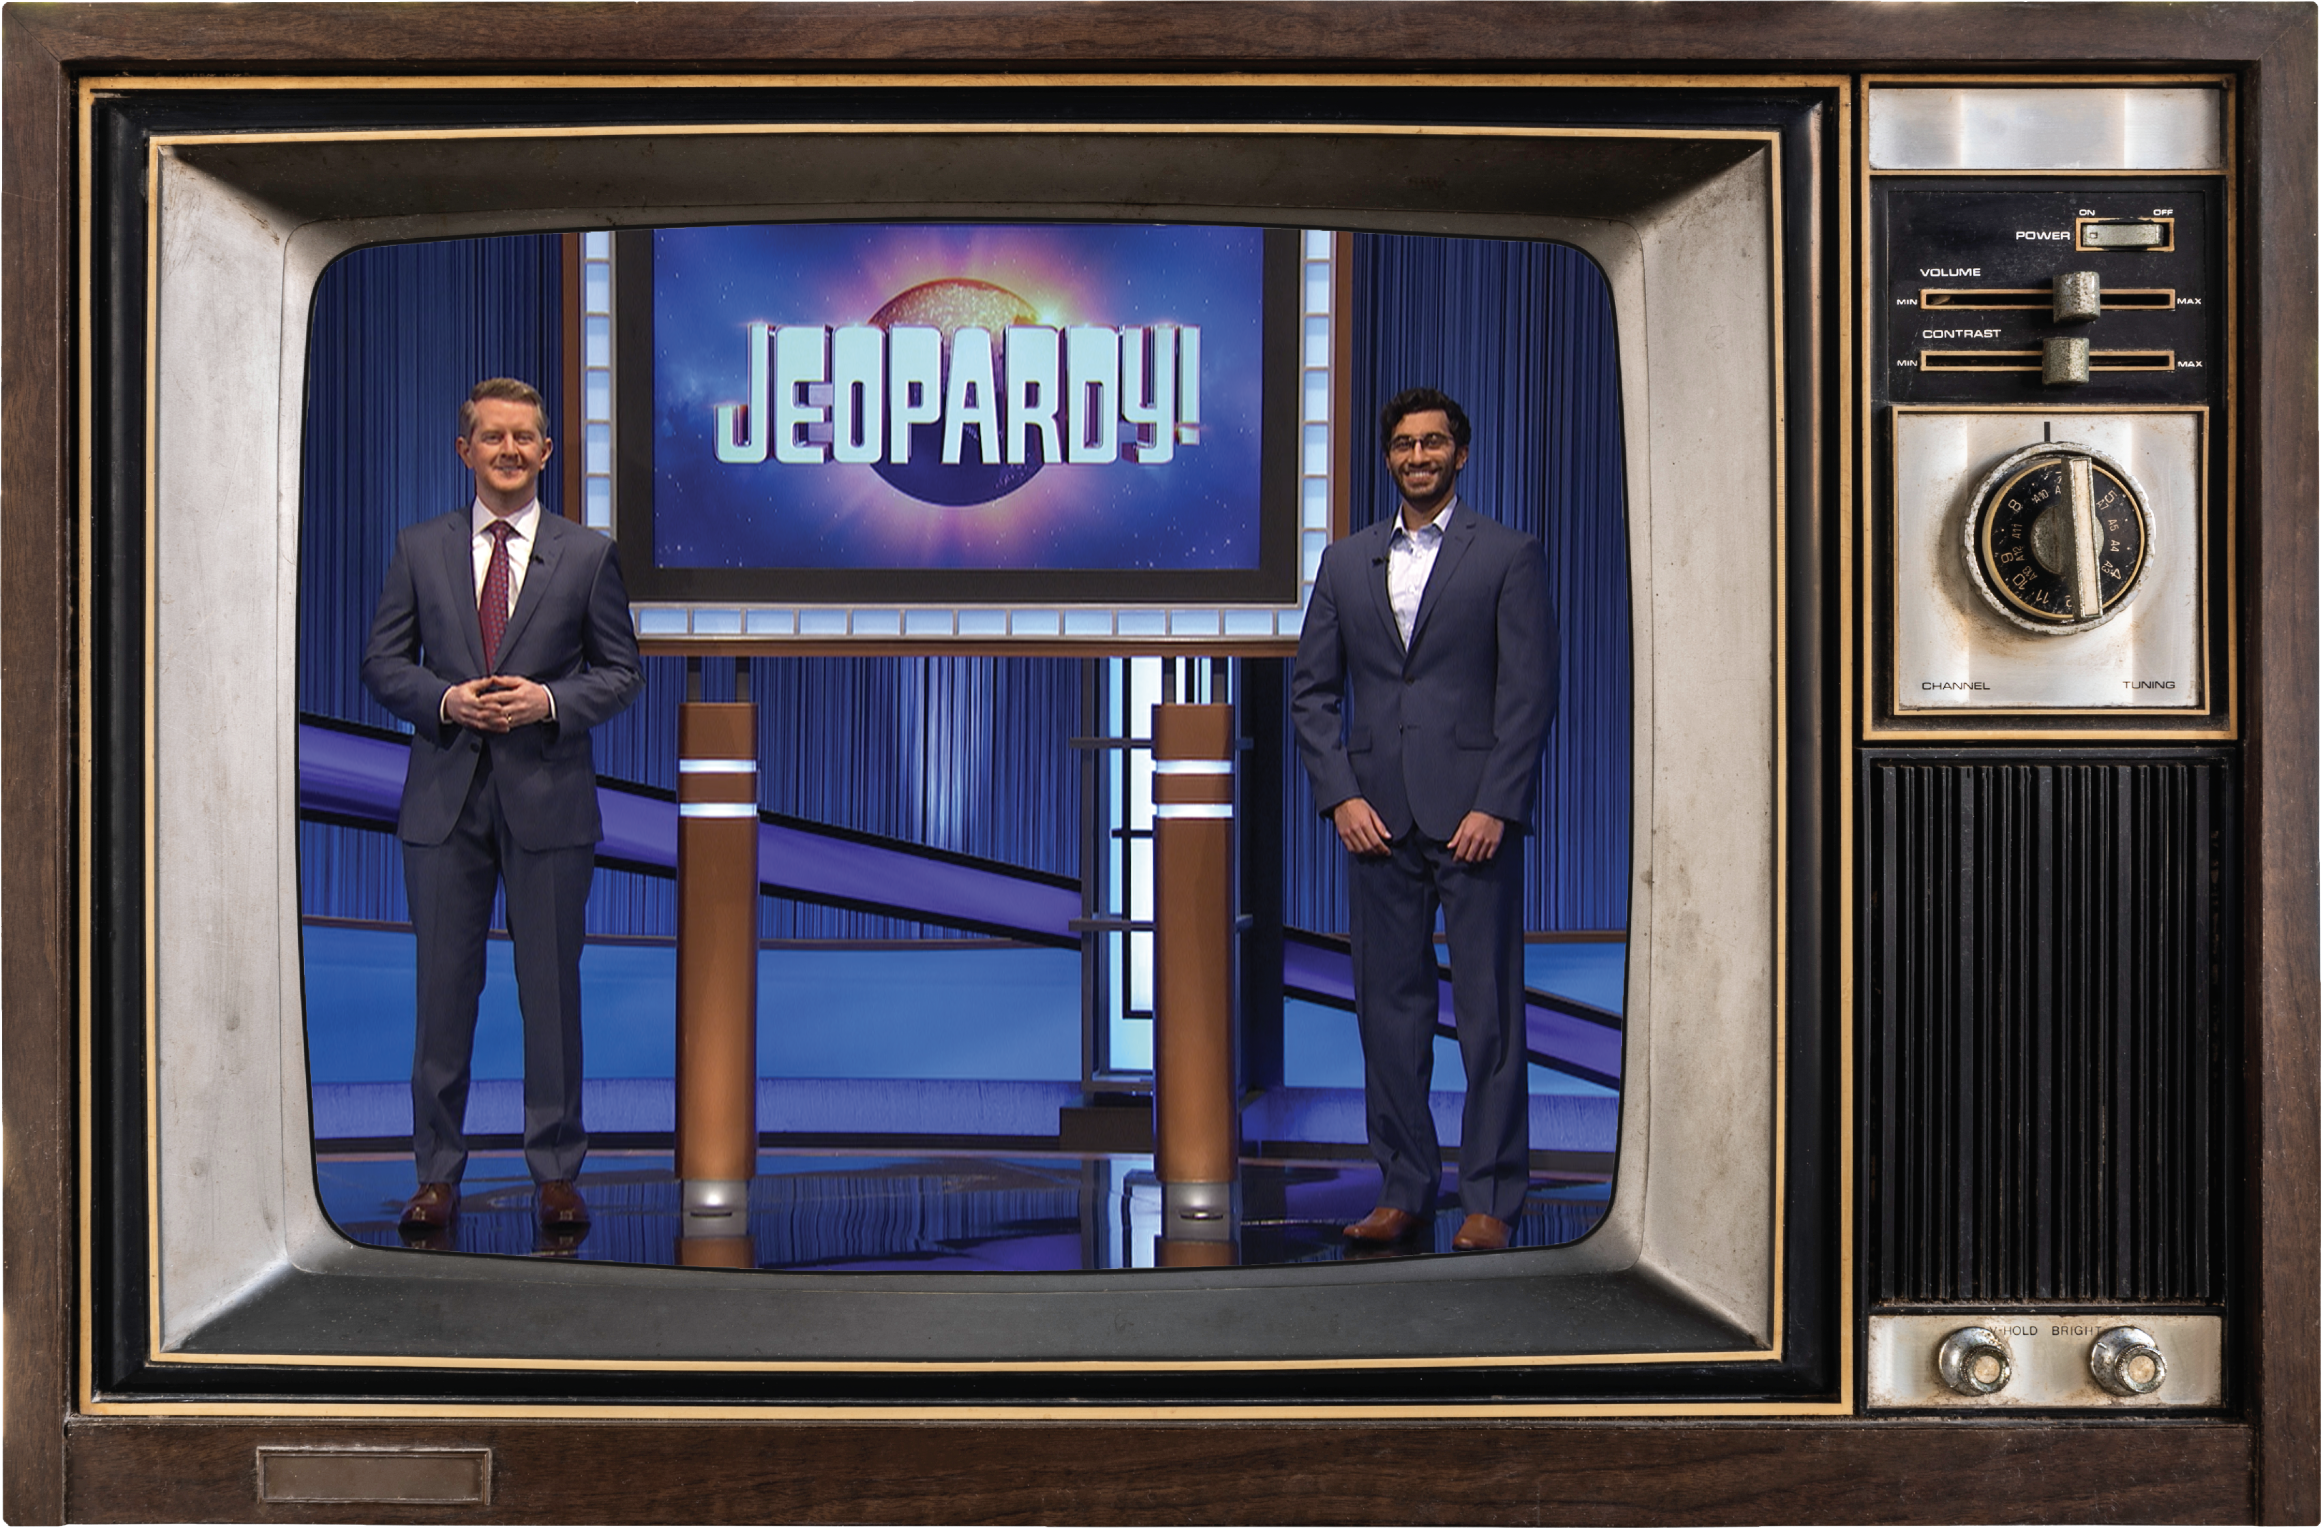 Recent School of Engineering grad Mihir Nene joined the elite club of “Jeopardy!” winners, shown in this photo illustration with a vintage TV screen